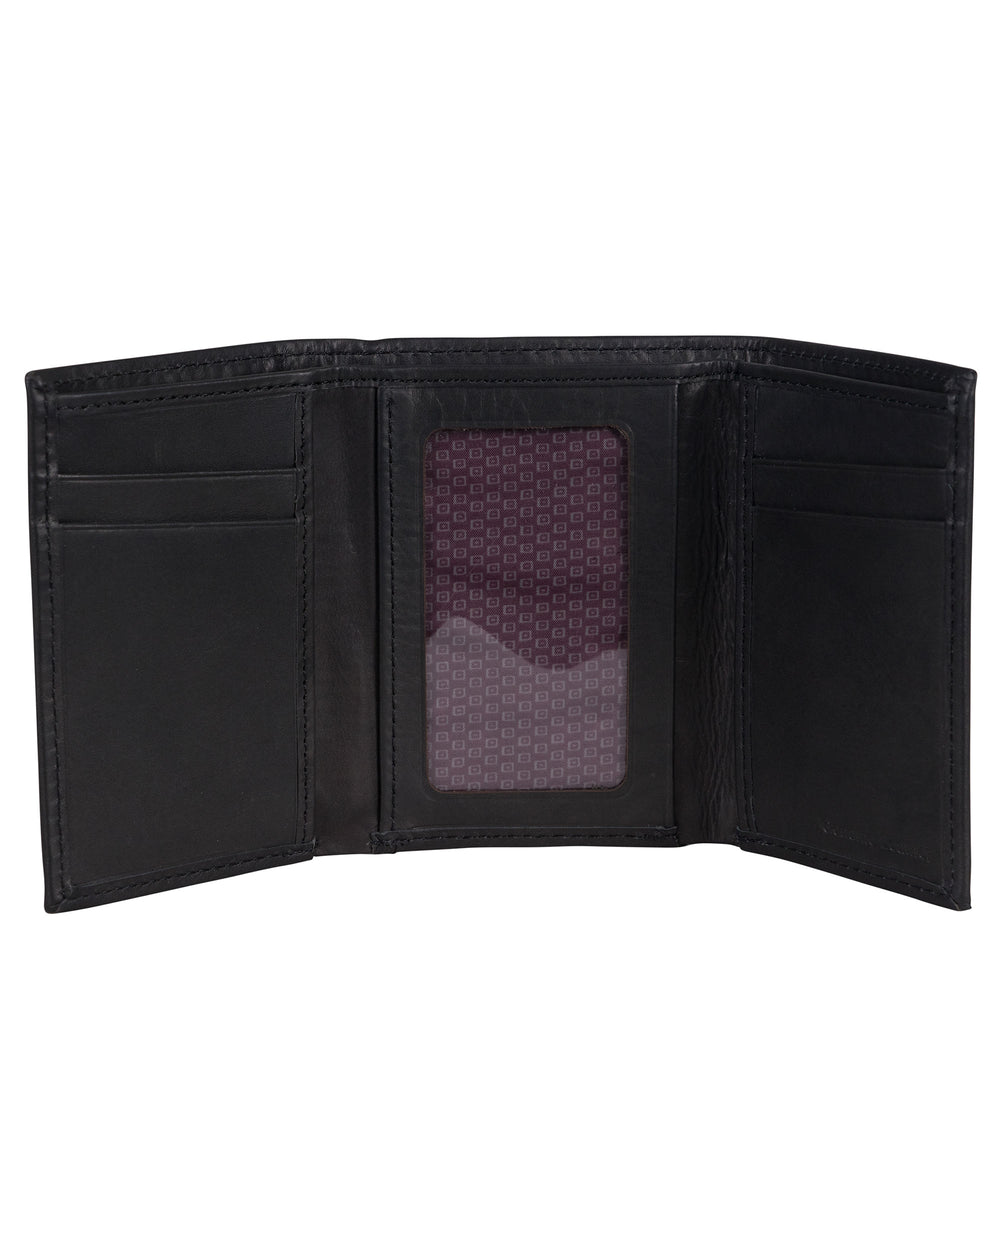 Manchester Marble Crunch Leather Trifold Wallet - Black